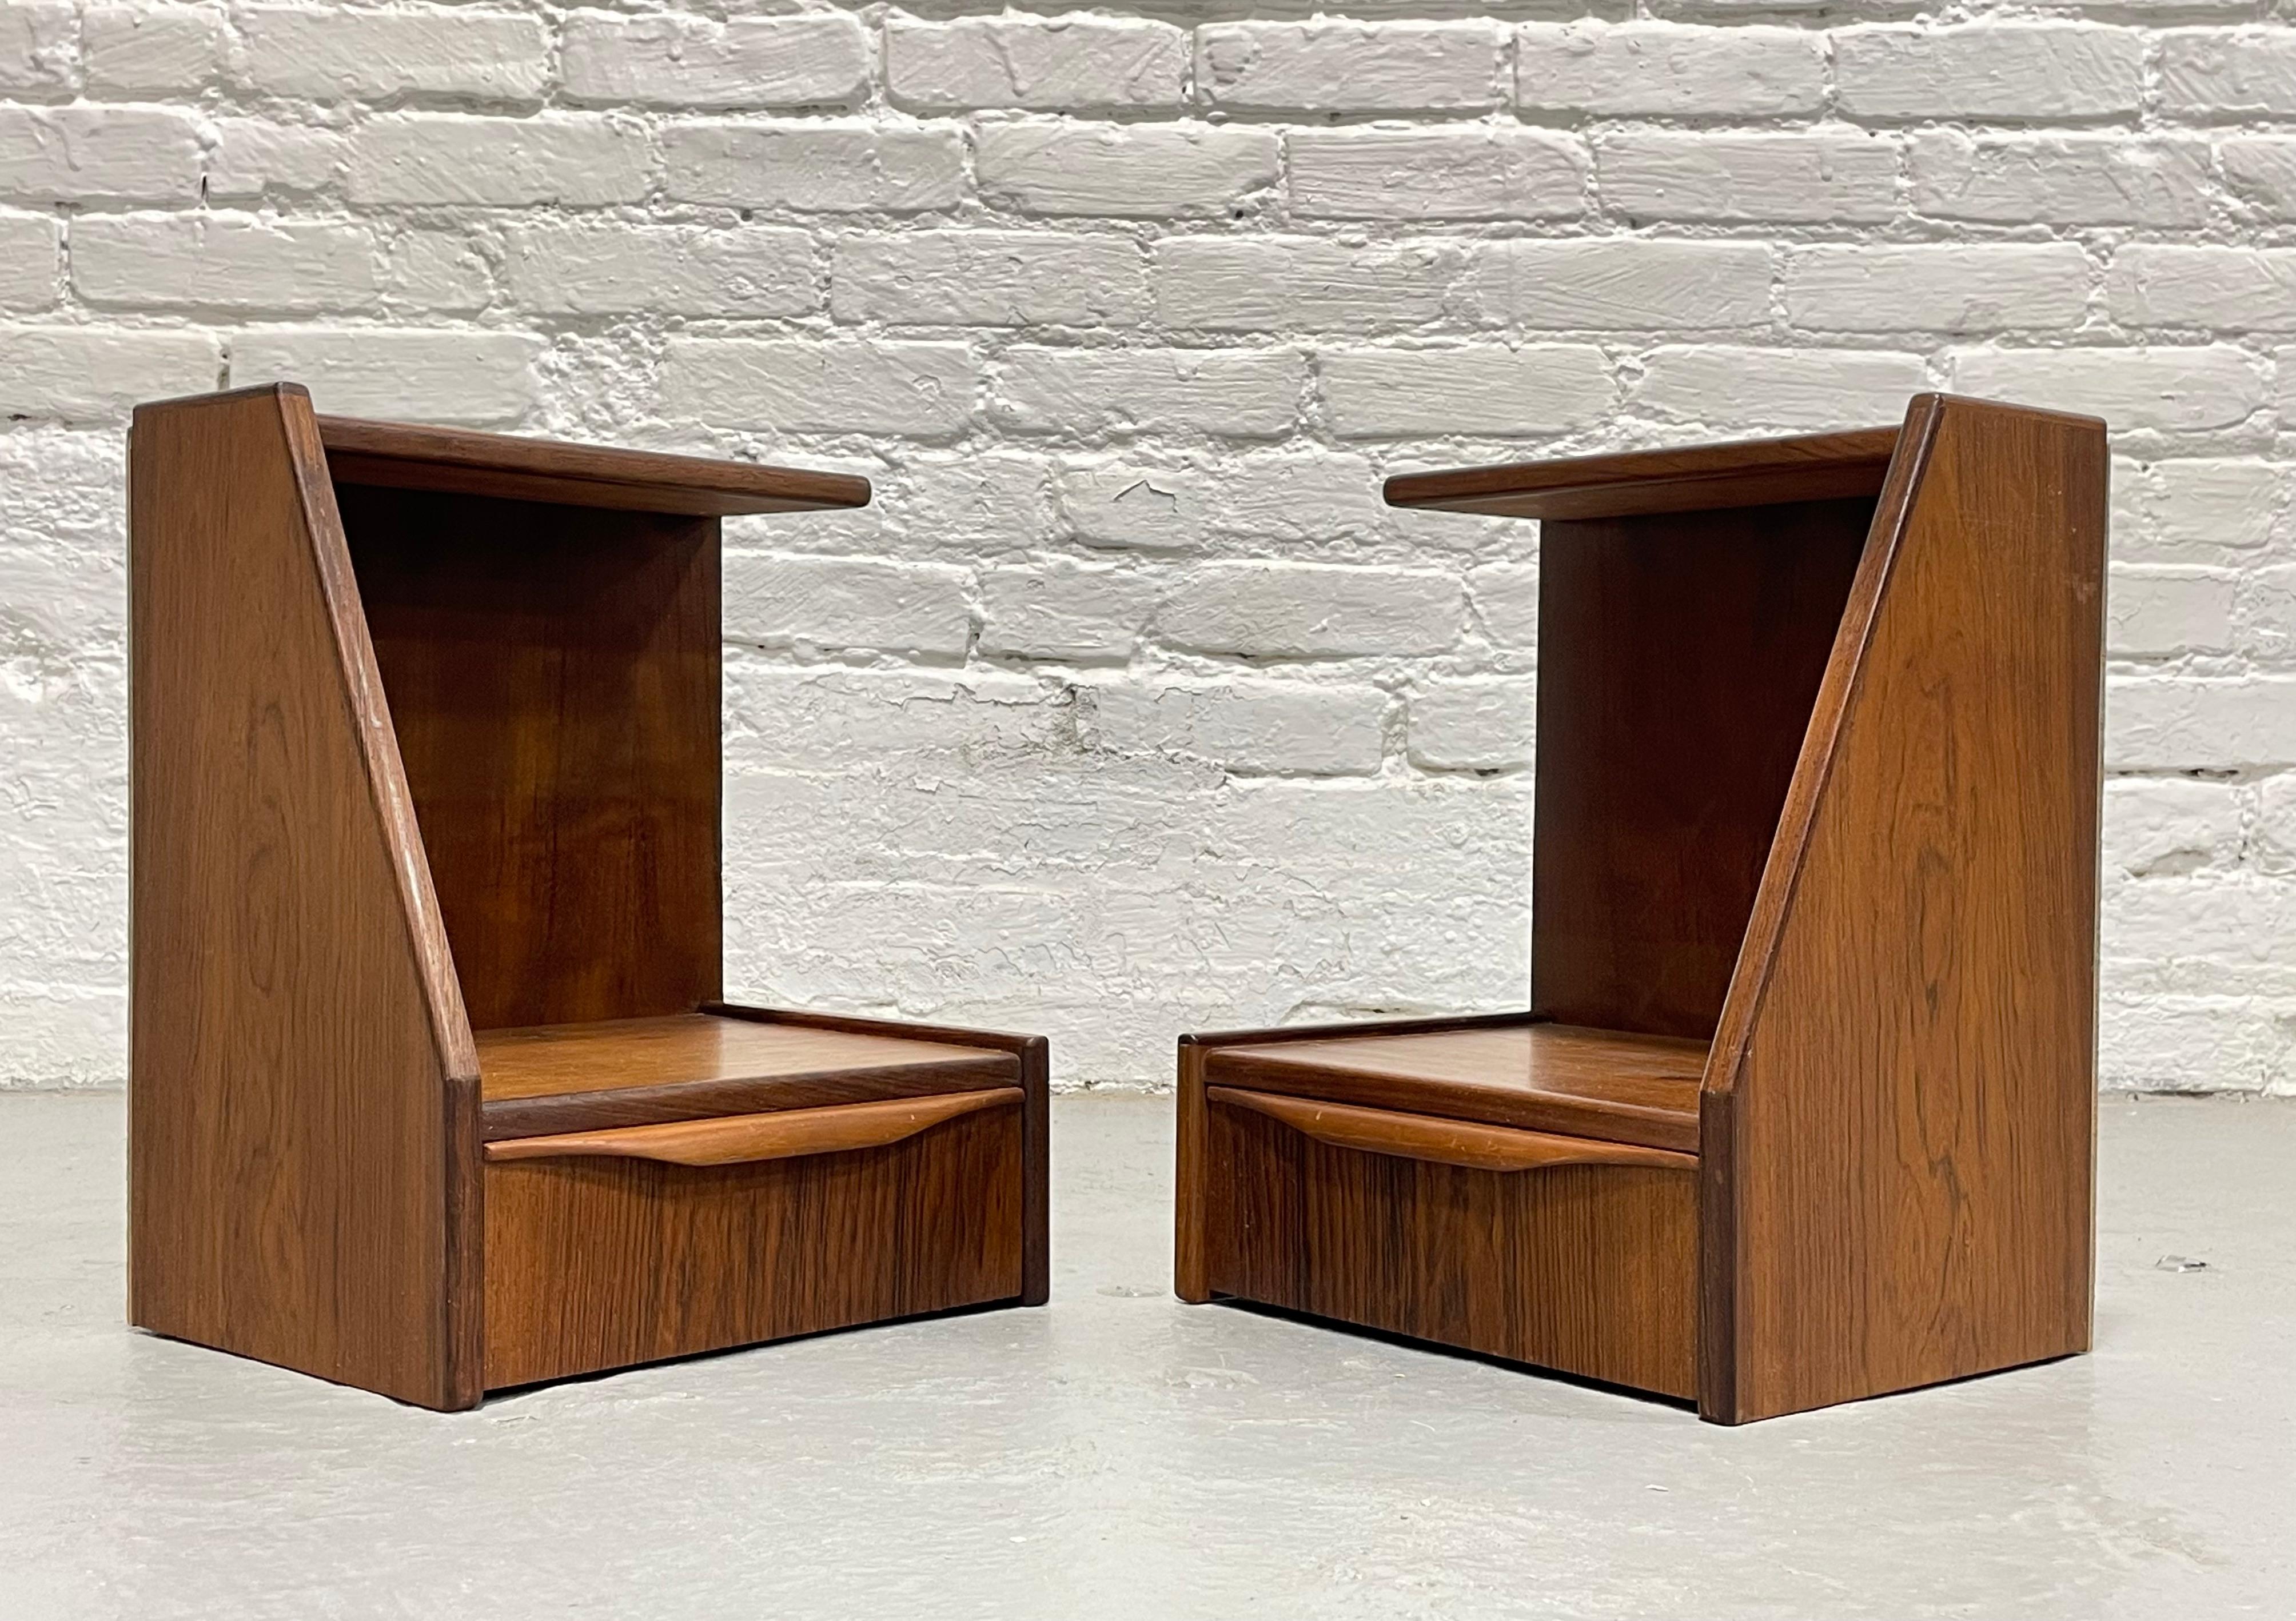 DANISH Mid Century Modern ROSEWOOD Hanging NIGHTSTANDS / Bedside Tables, c. 1950 For Sale 8